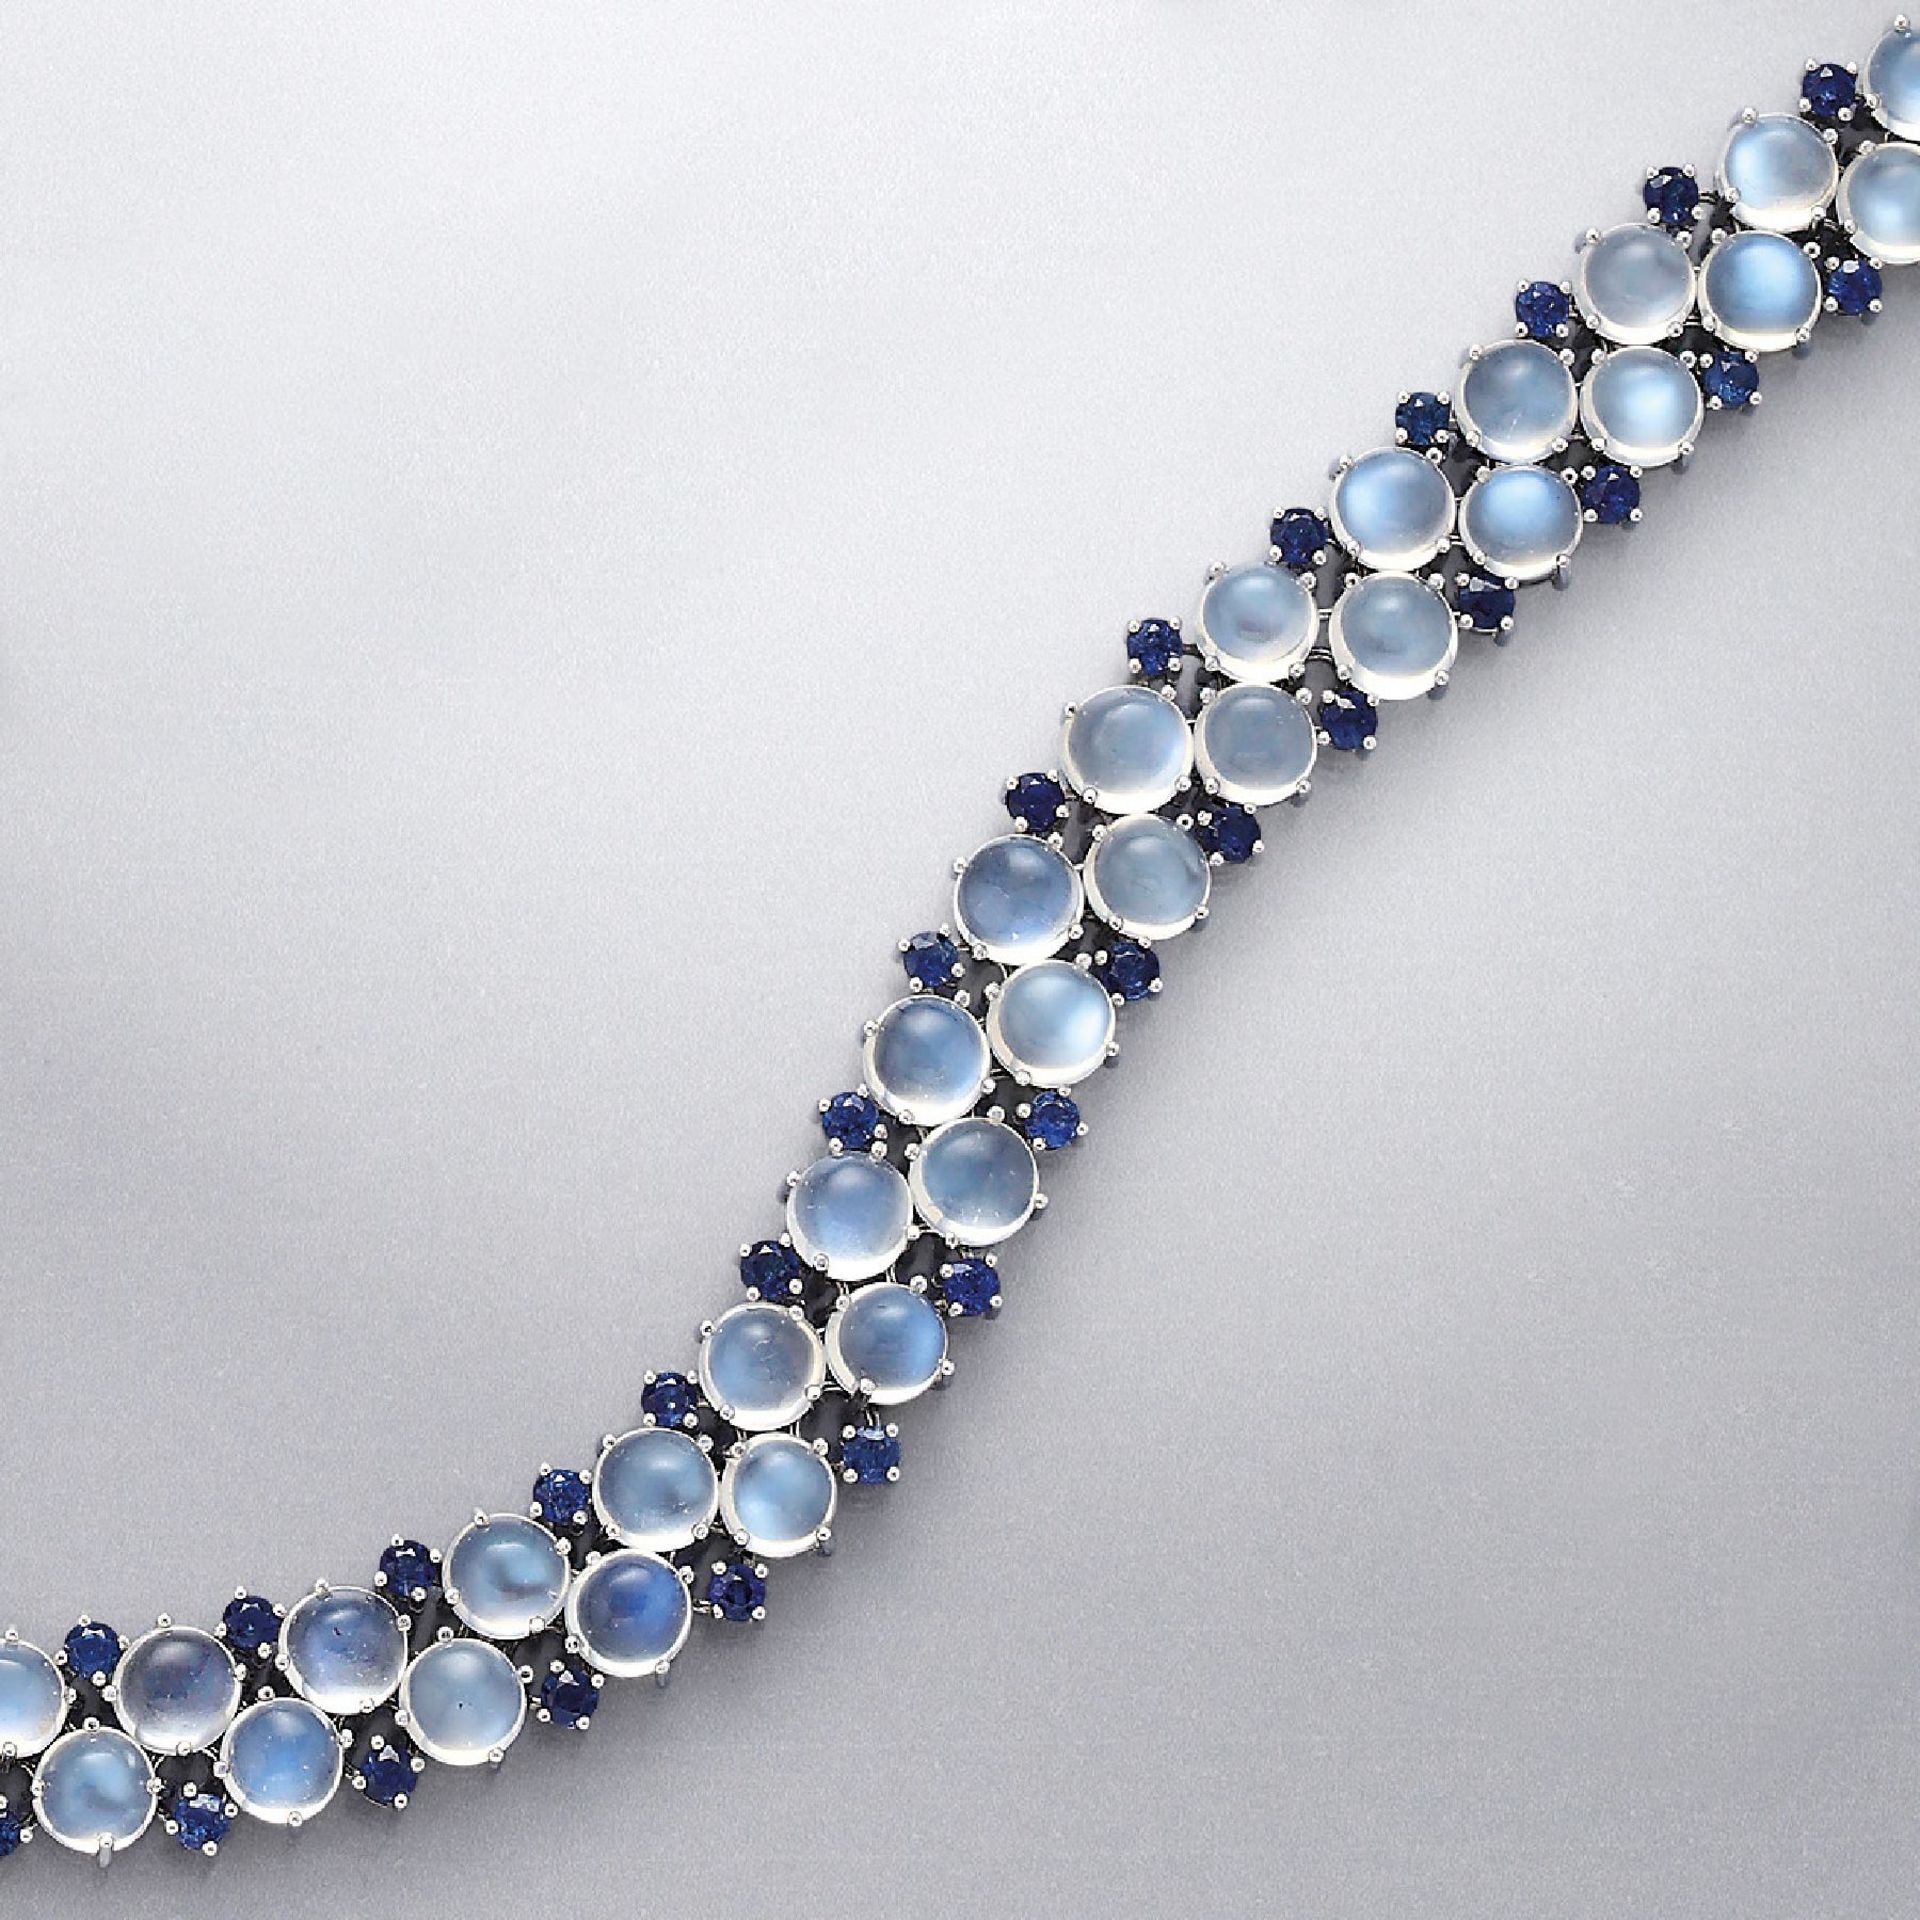 18 kt gold bracelet with moonstones and sapphires , WG 750/000, 42 round moonstone cabochons total